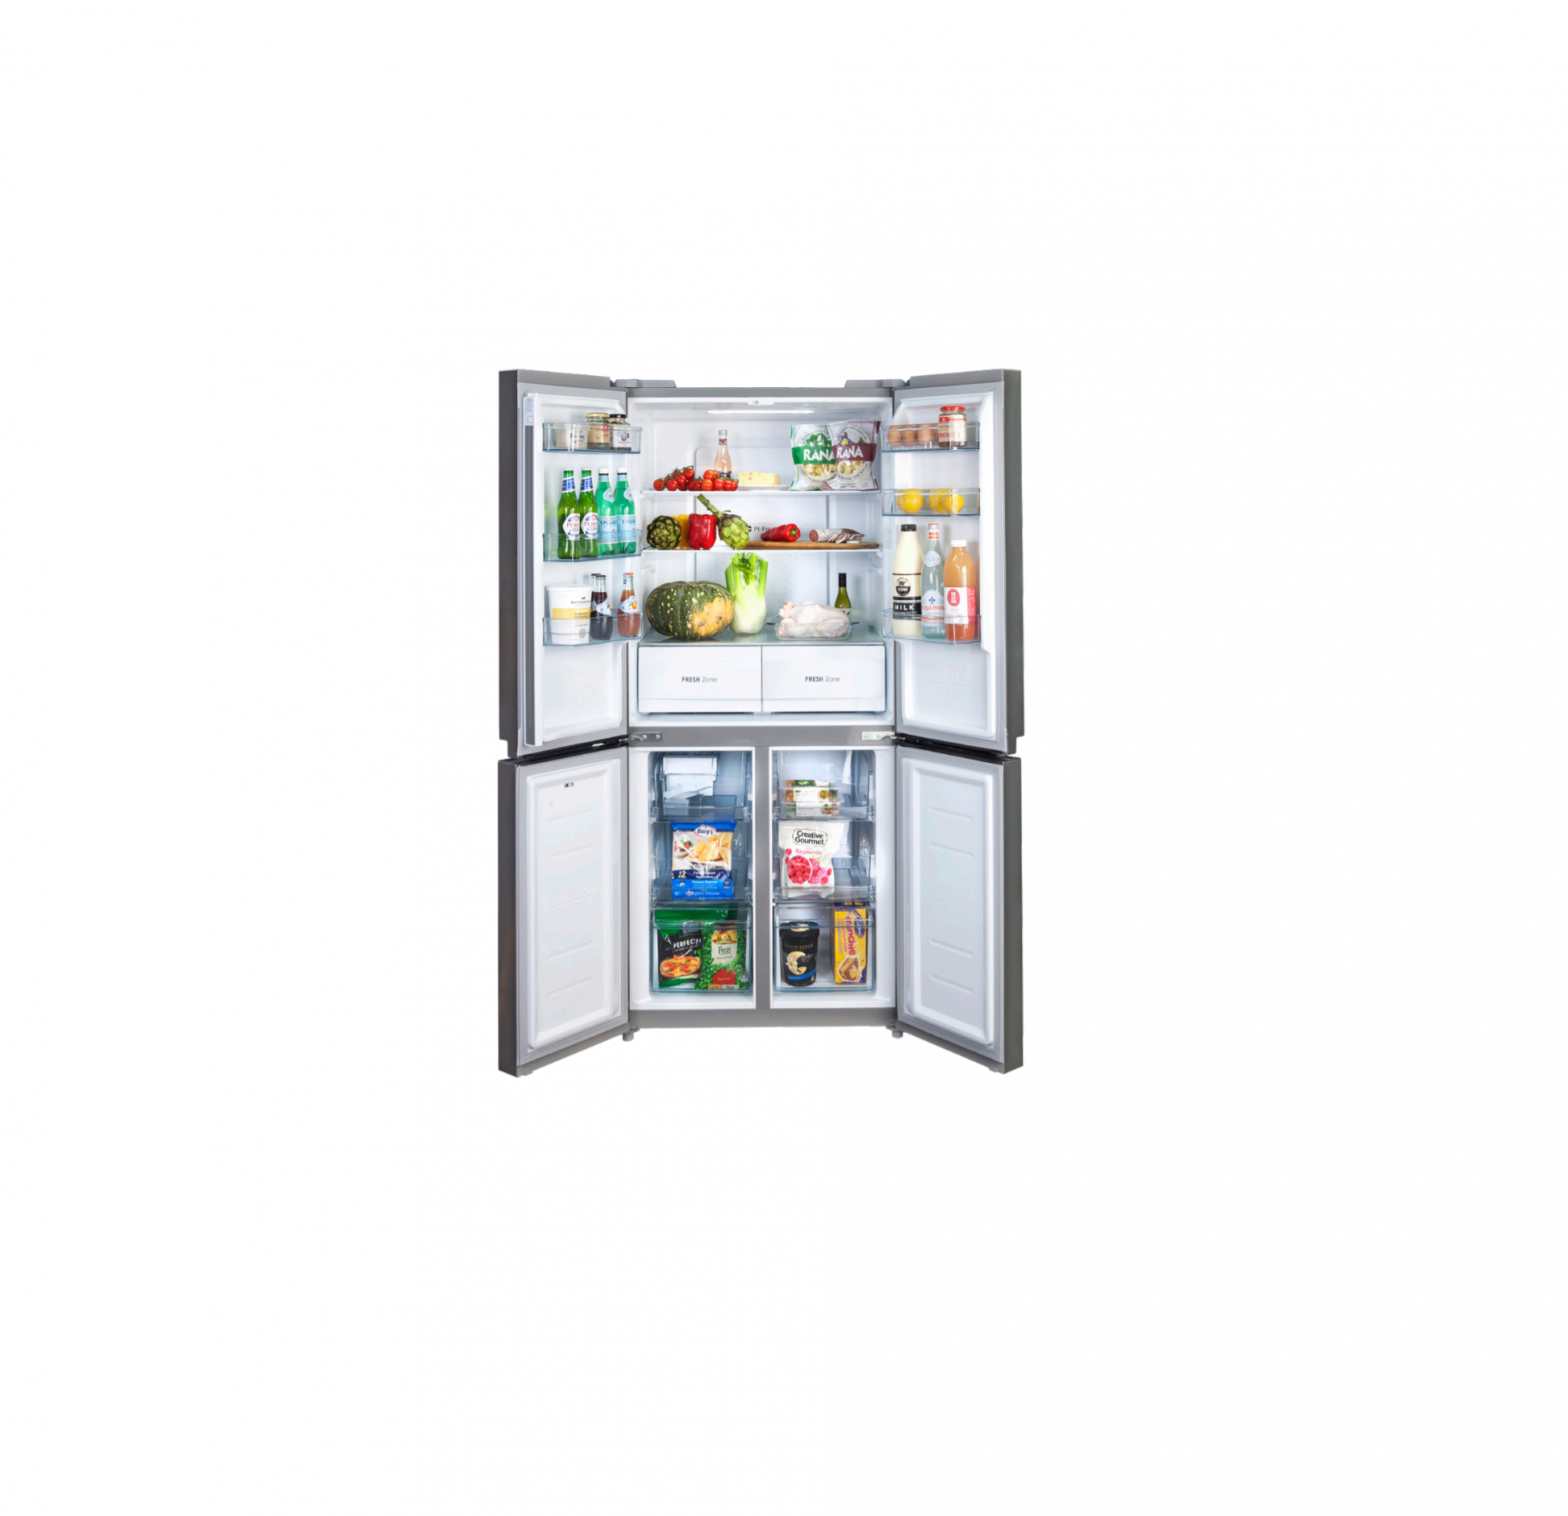 ILVE ILREF482FD Four Door Refrigerator and Freezer User Guide